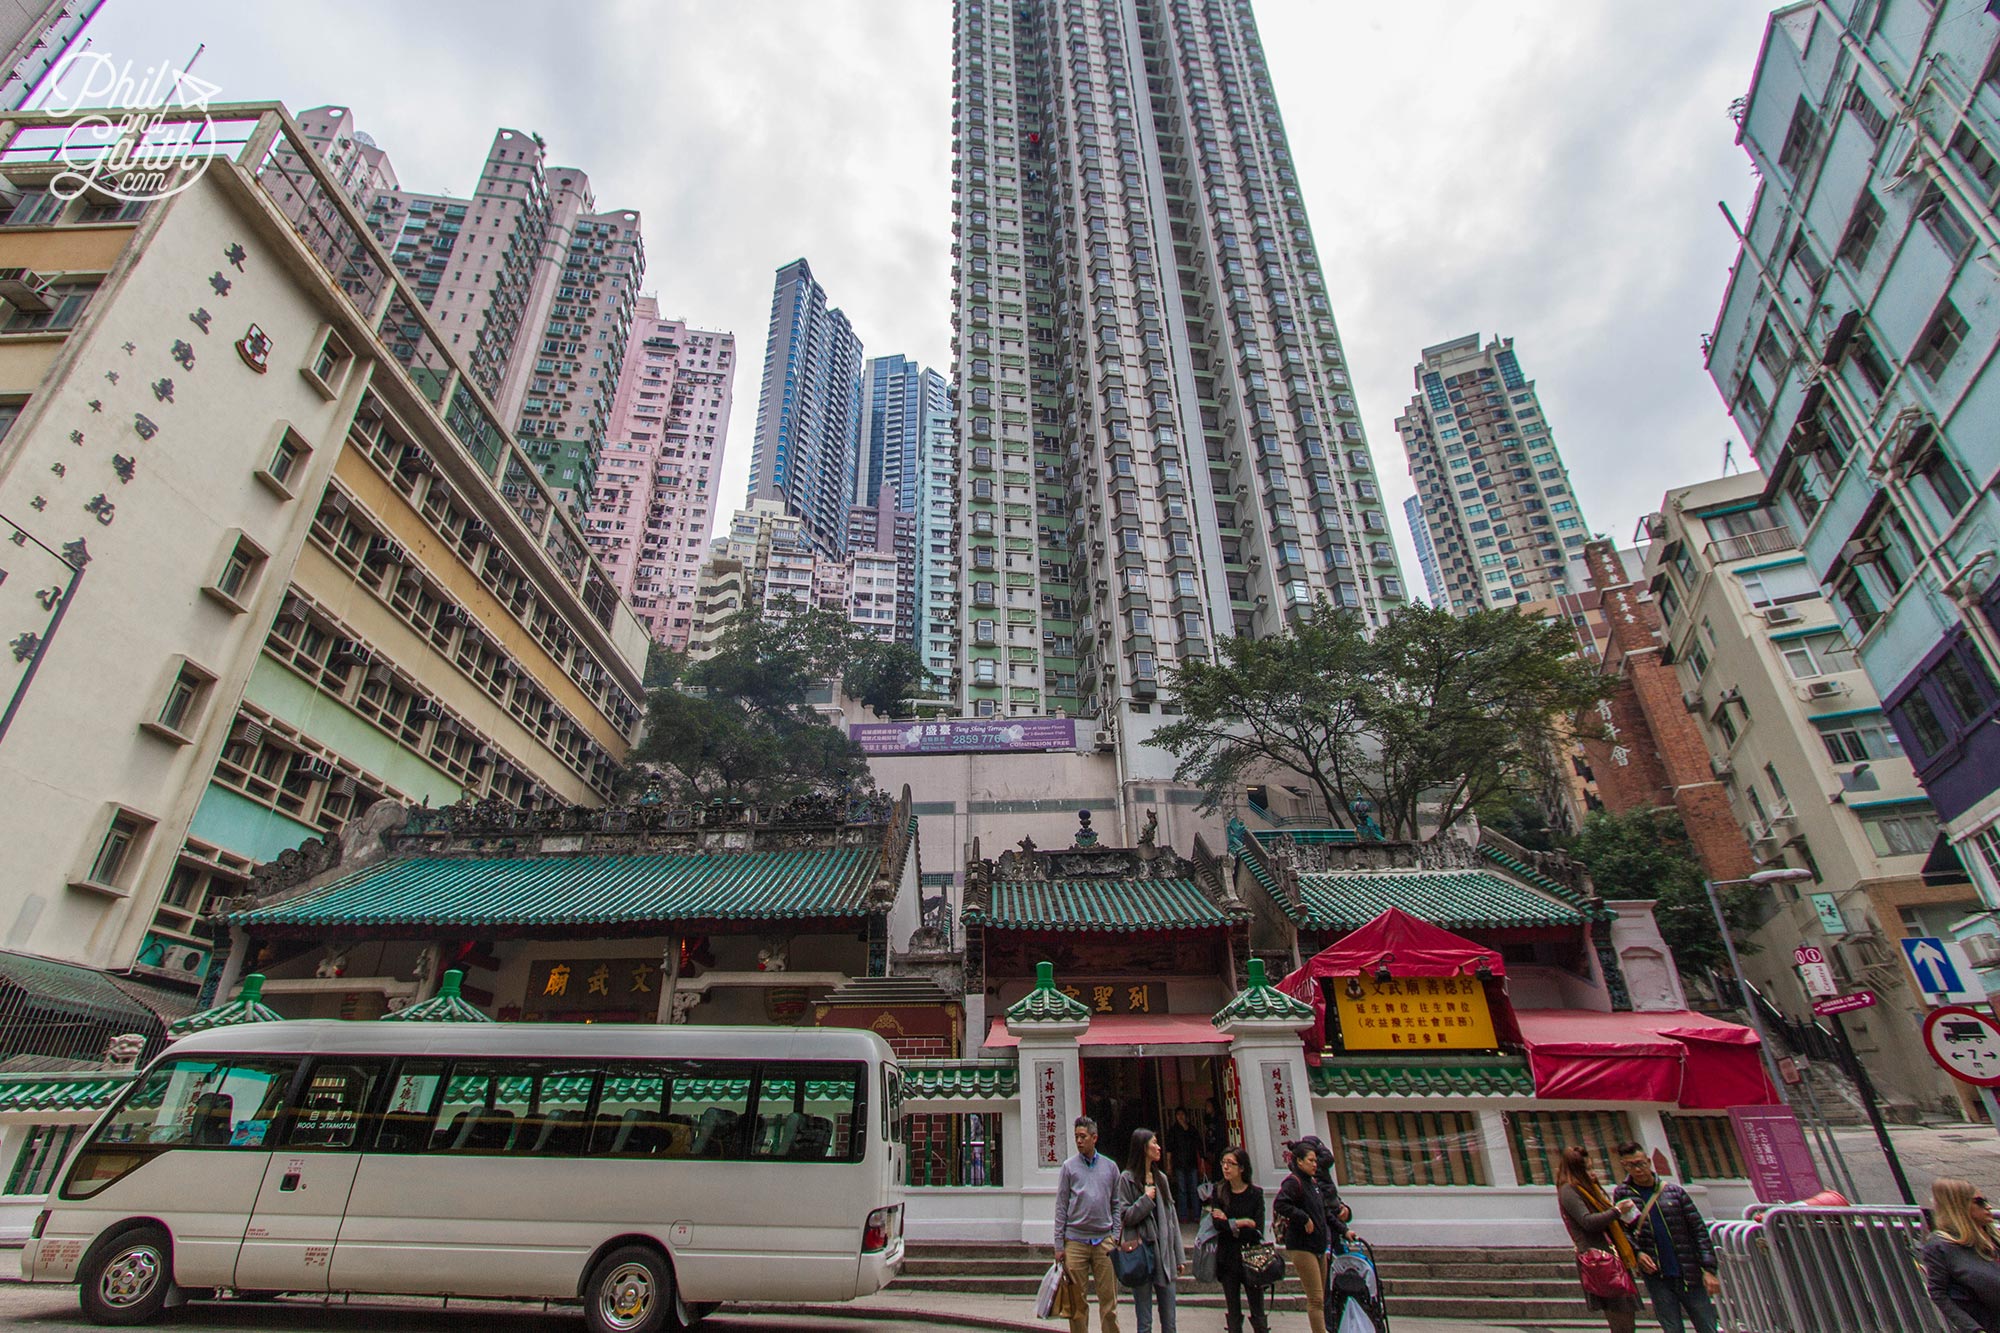 Man Mo Temple nestled amongst residential skyscrapers